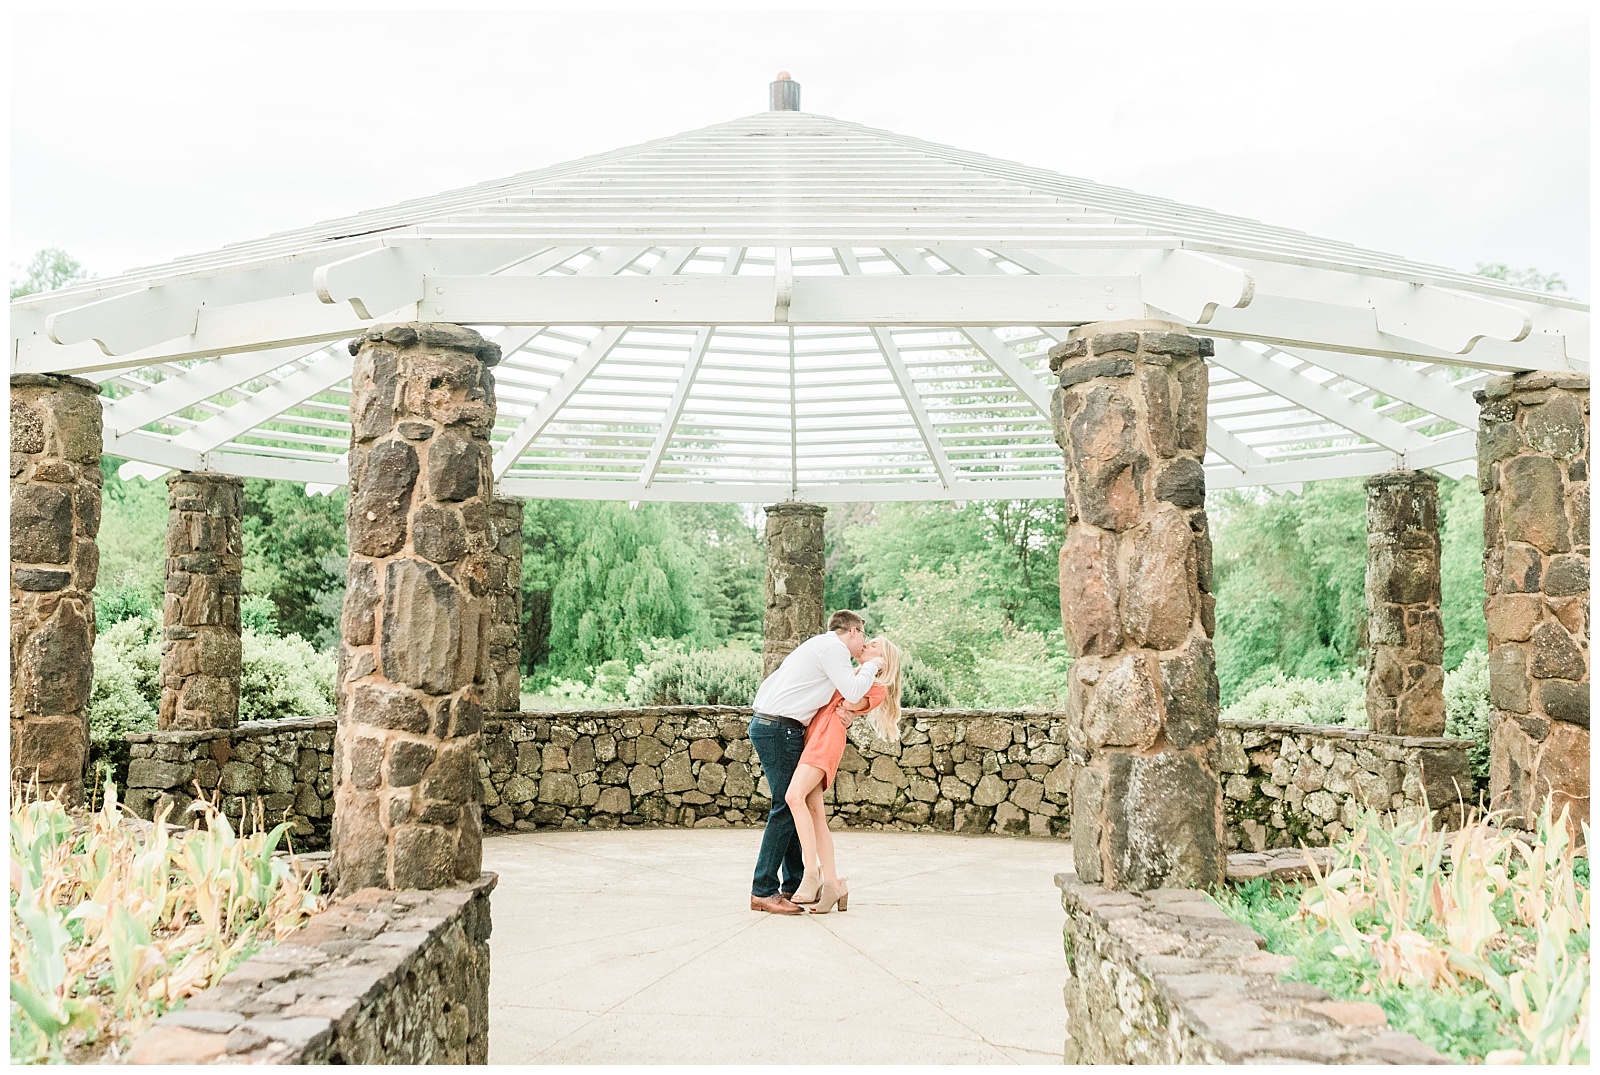 A man dips back his fiancee for a kiss under the gazebo in Deep Cut Gardens.